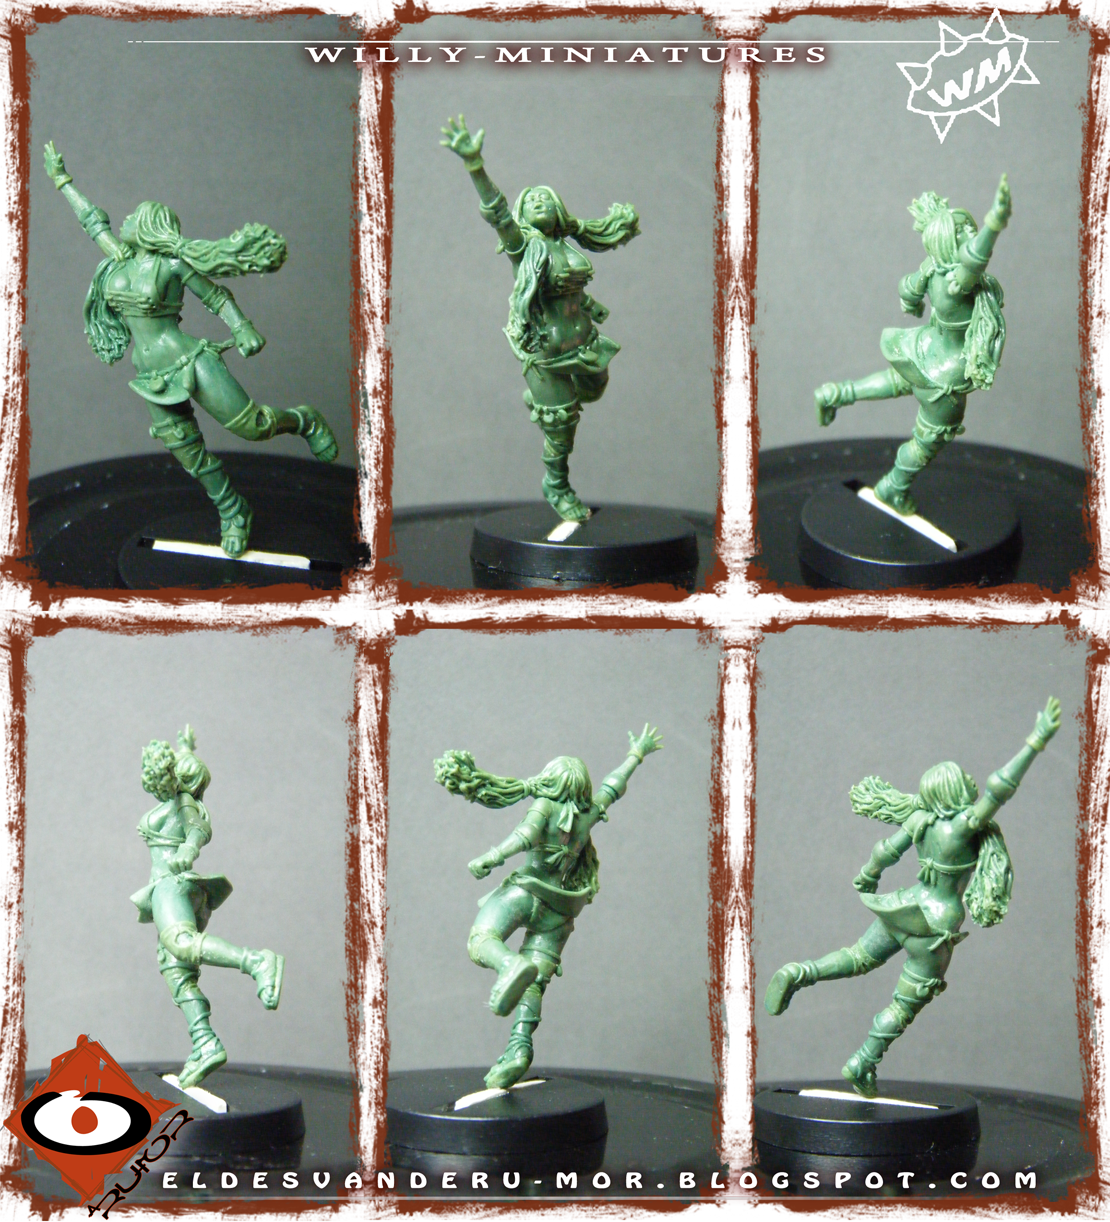 Bowl Amazon Team Catcher miniature by ªRU-MOR for WILLY Miniatures, fantasy football